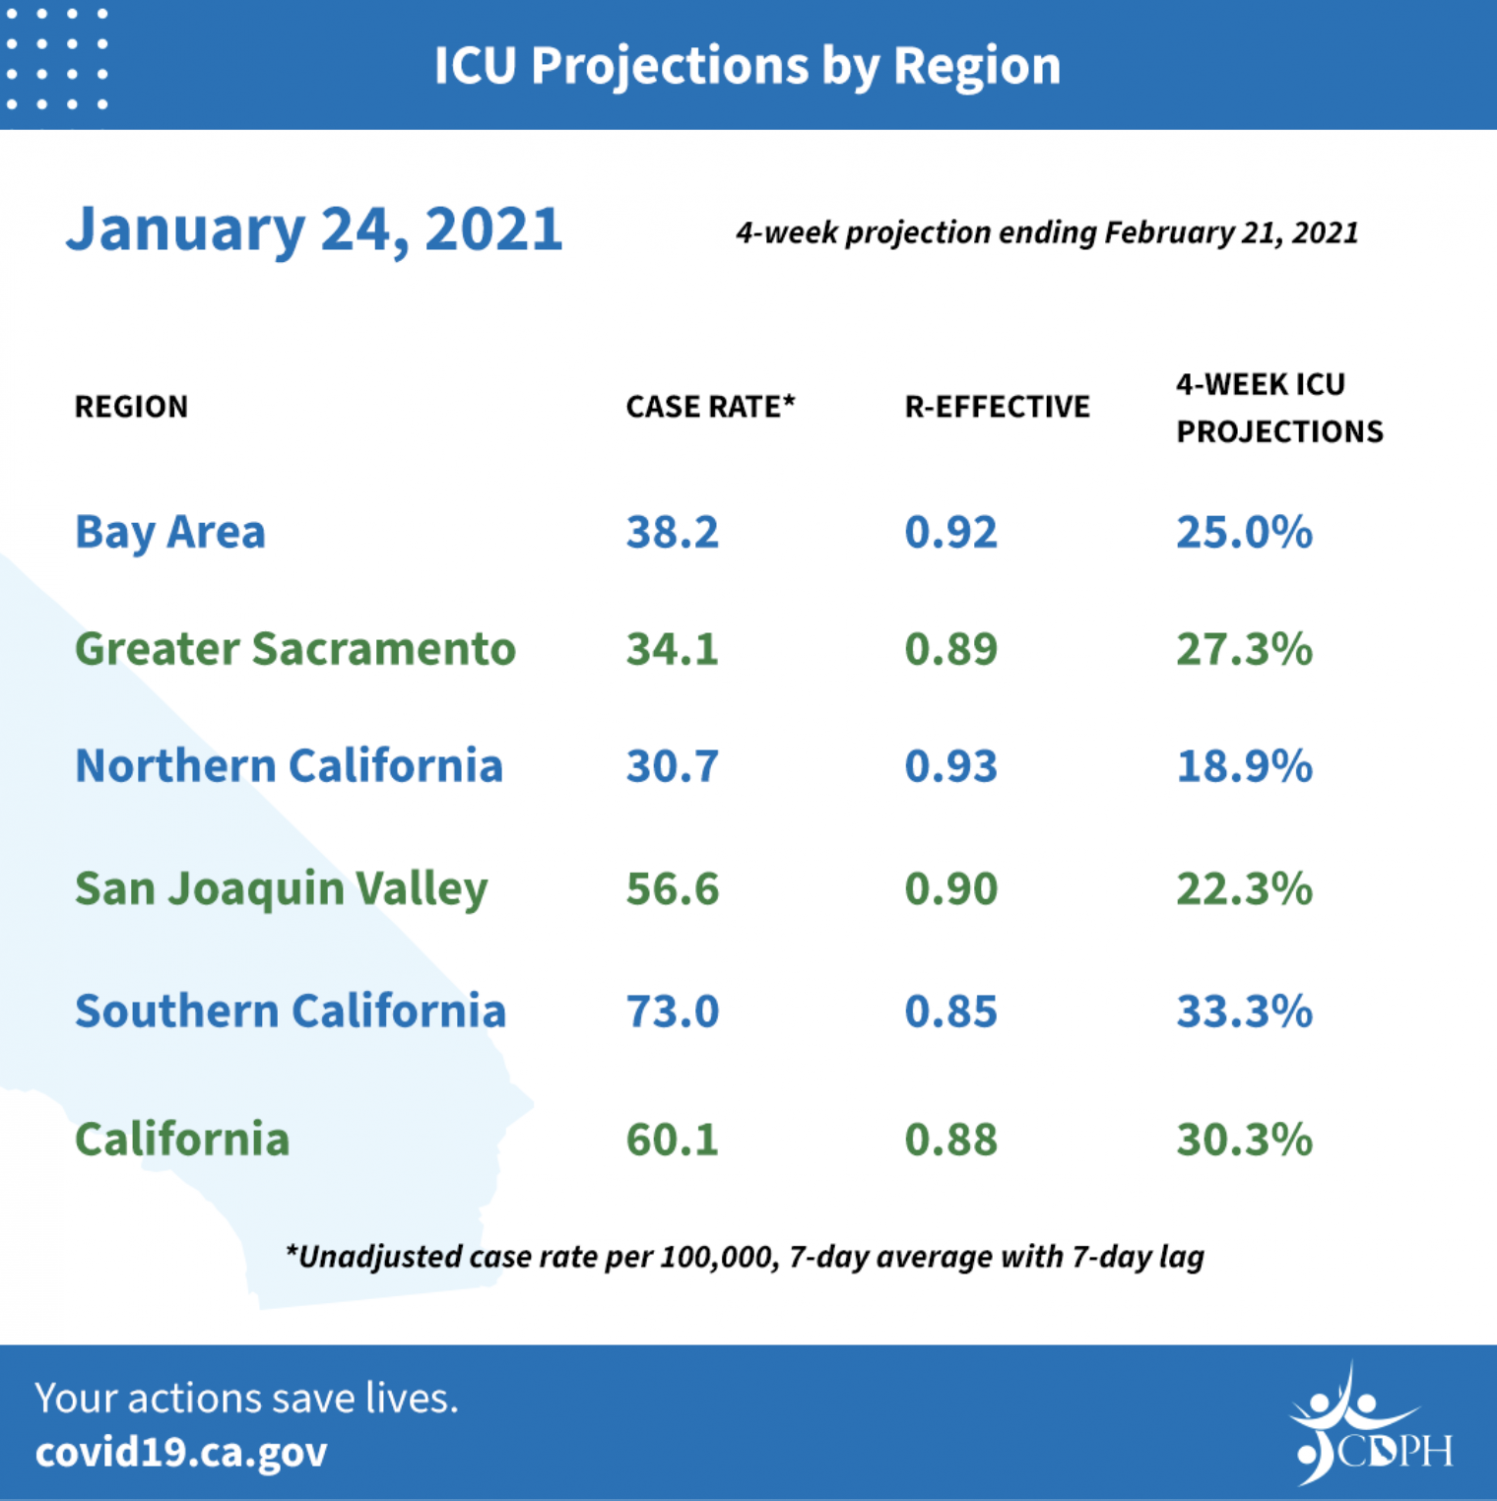 A 4-week ICU projection by region was released by the California Department of Public Health